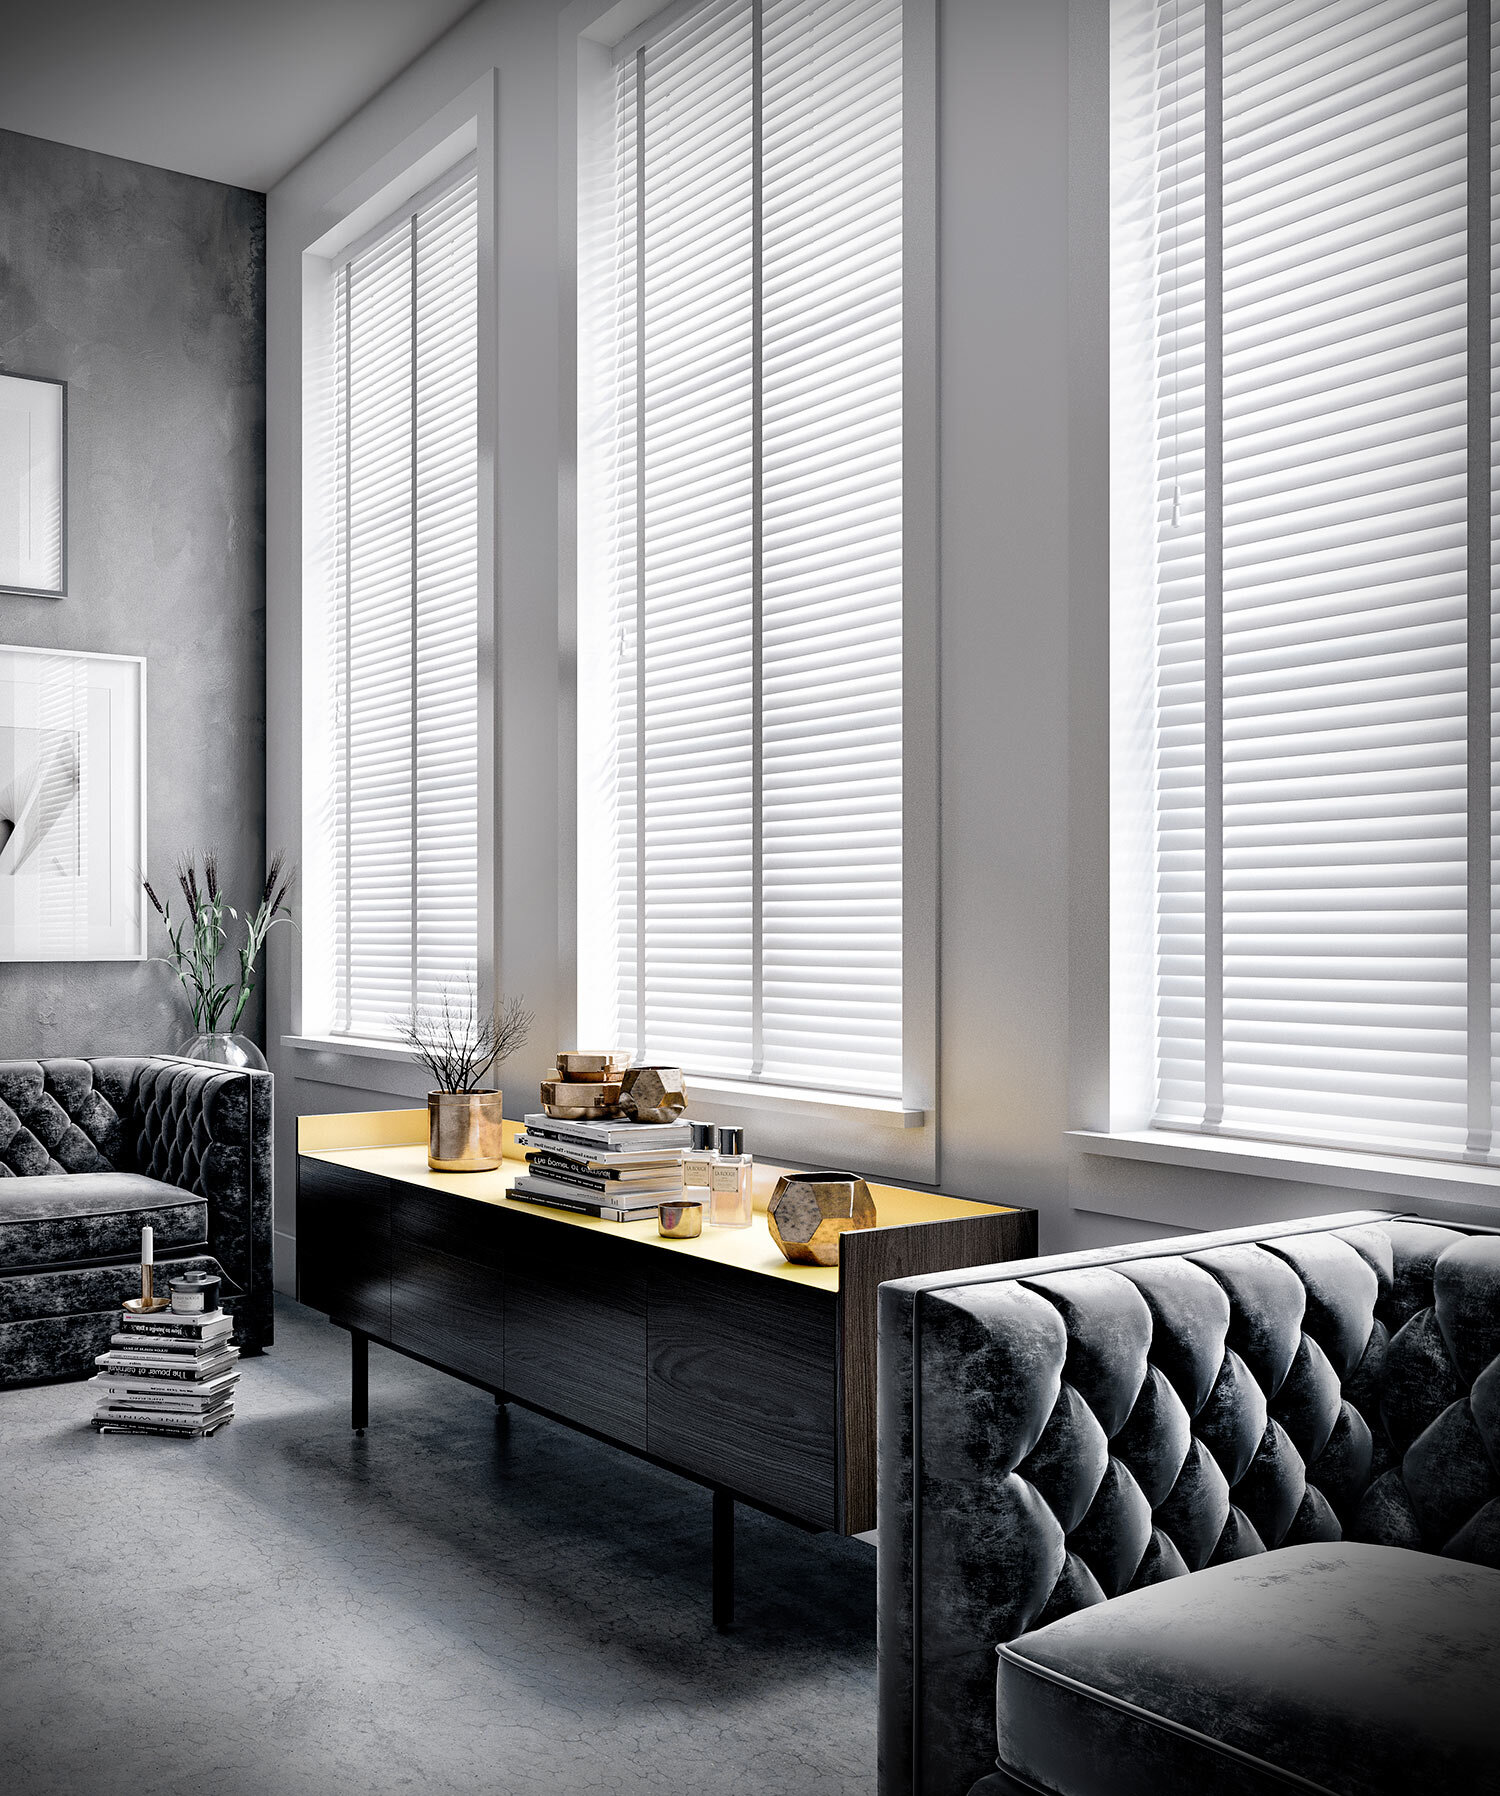 Electric Window Blinds Southampton. Electric blinds can either be mains or battery powered. We offer a great retro-fit rechargeable battery solution for all types of remote controlled window blinds. 